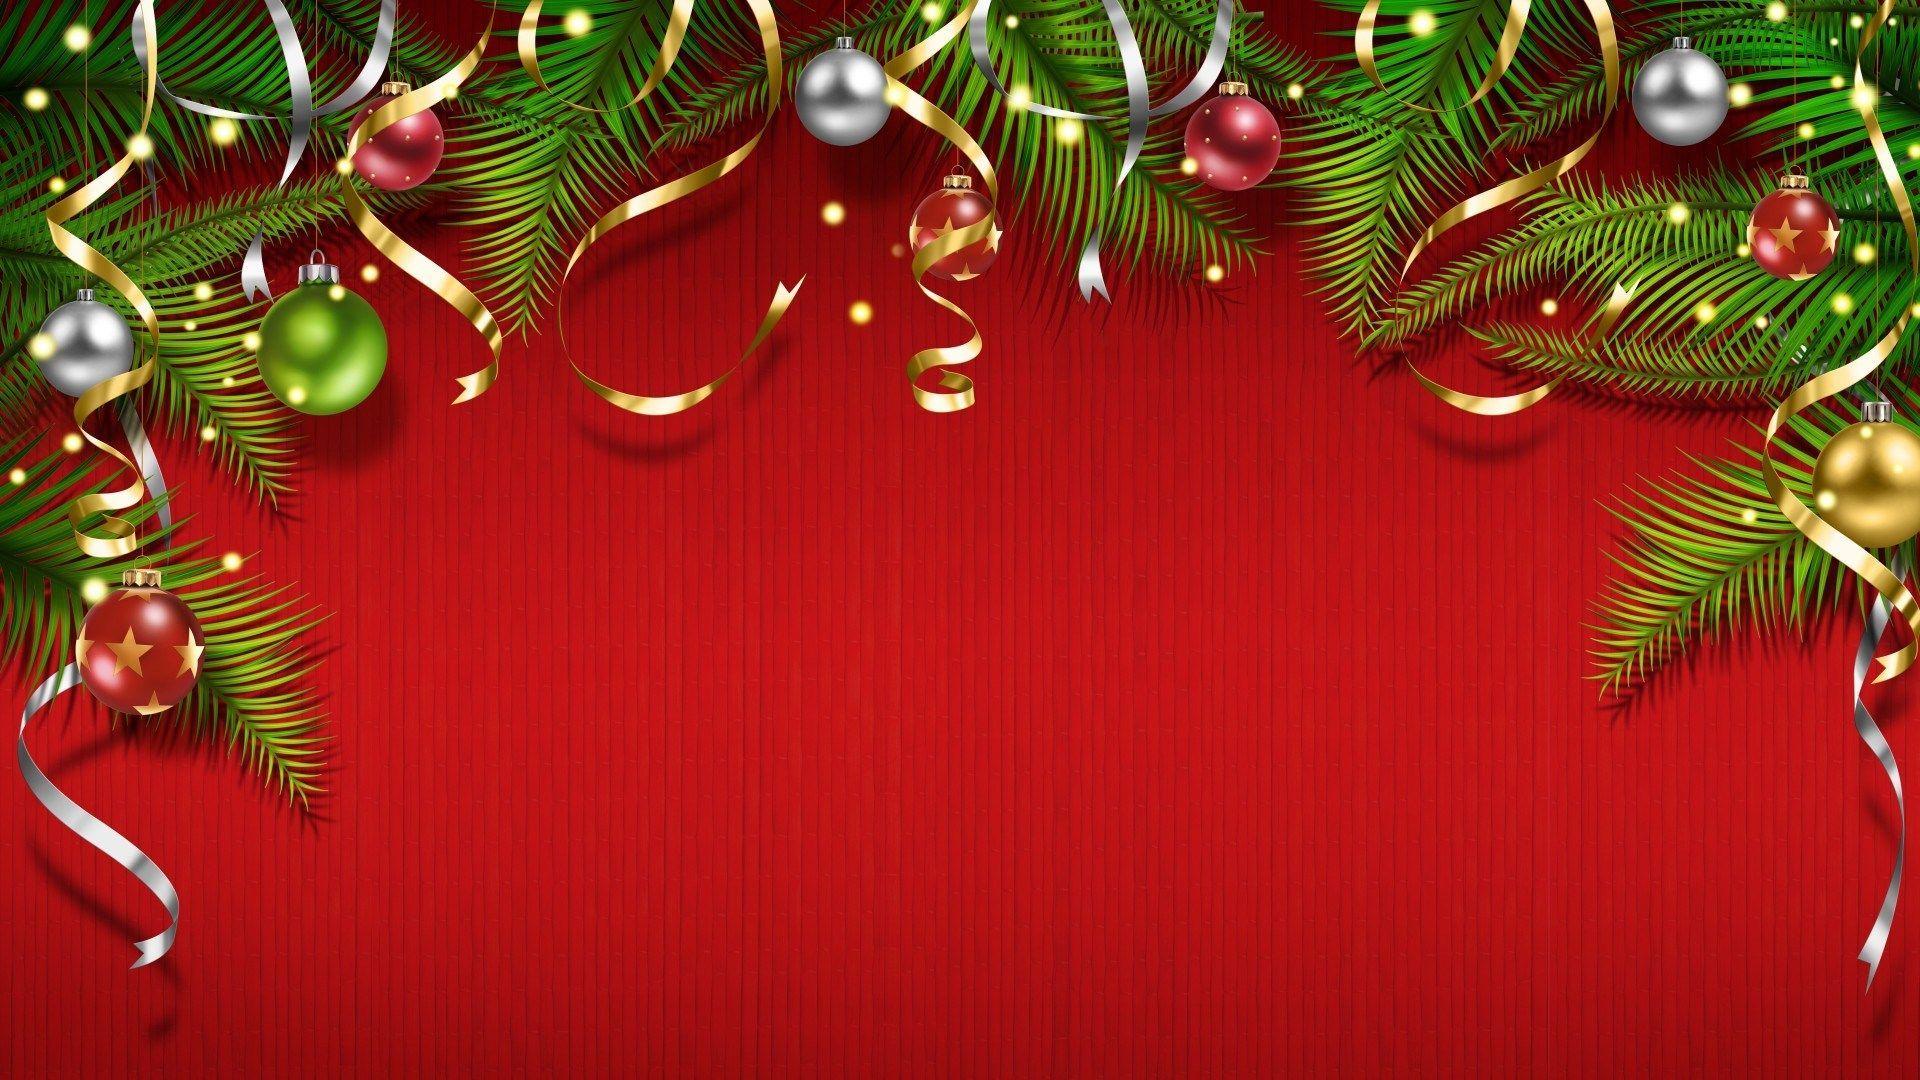 Fun and festive Background of Christmas party images for your phone and ...